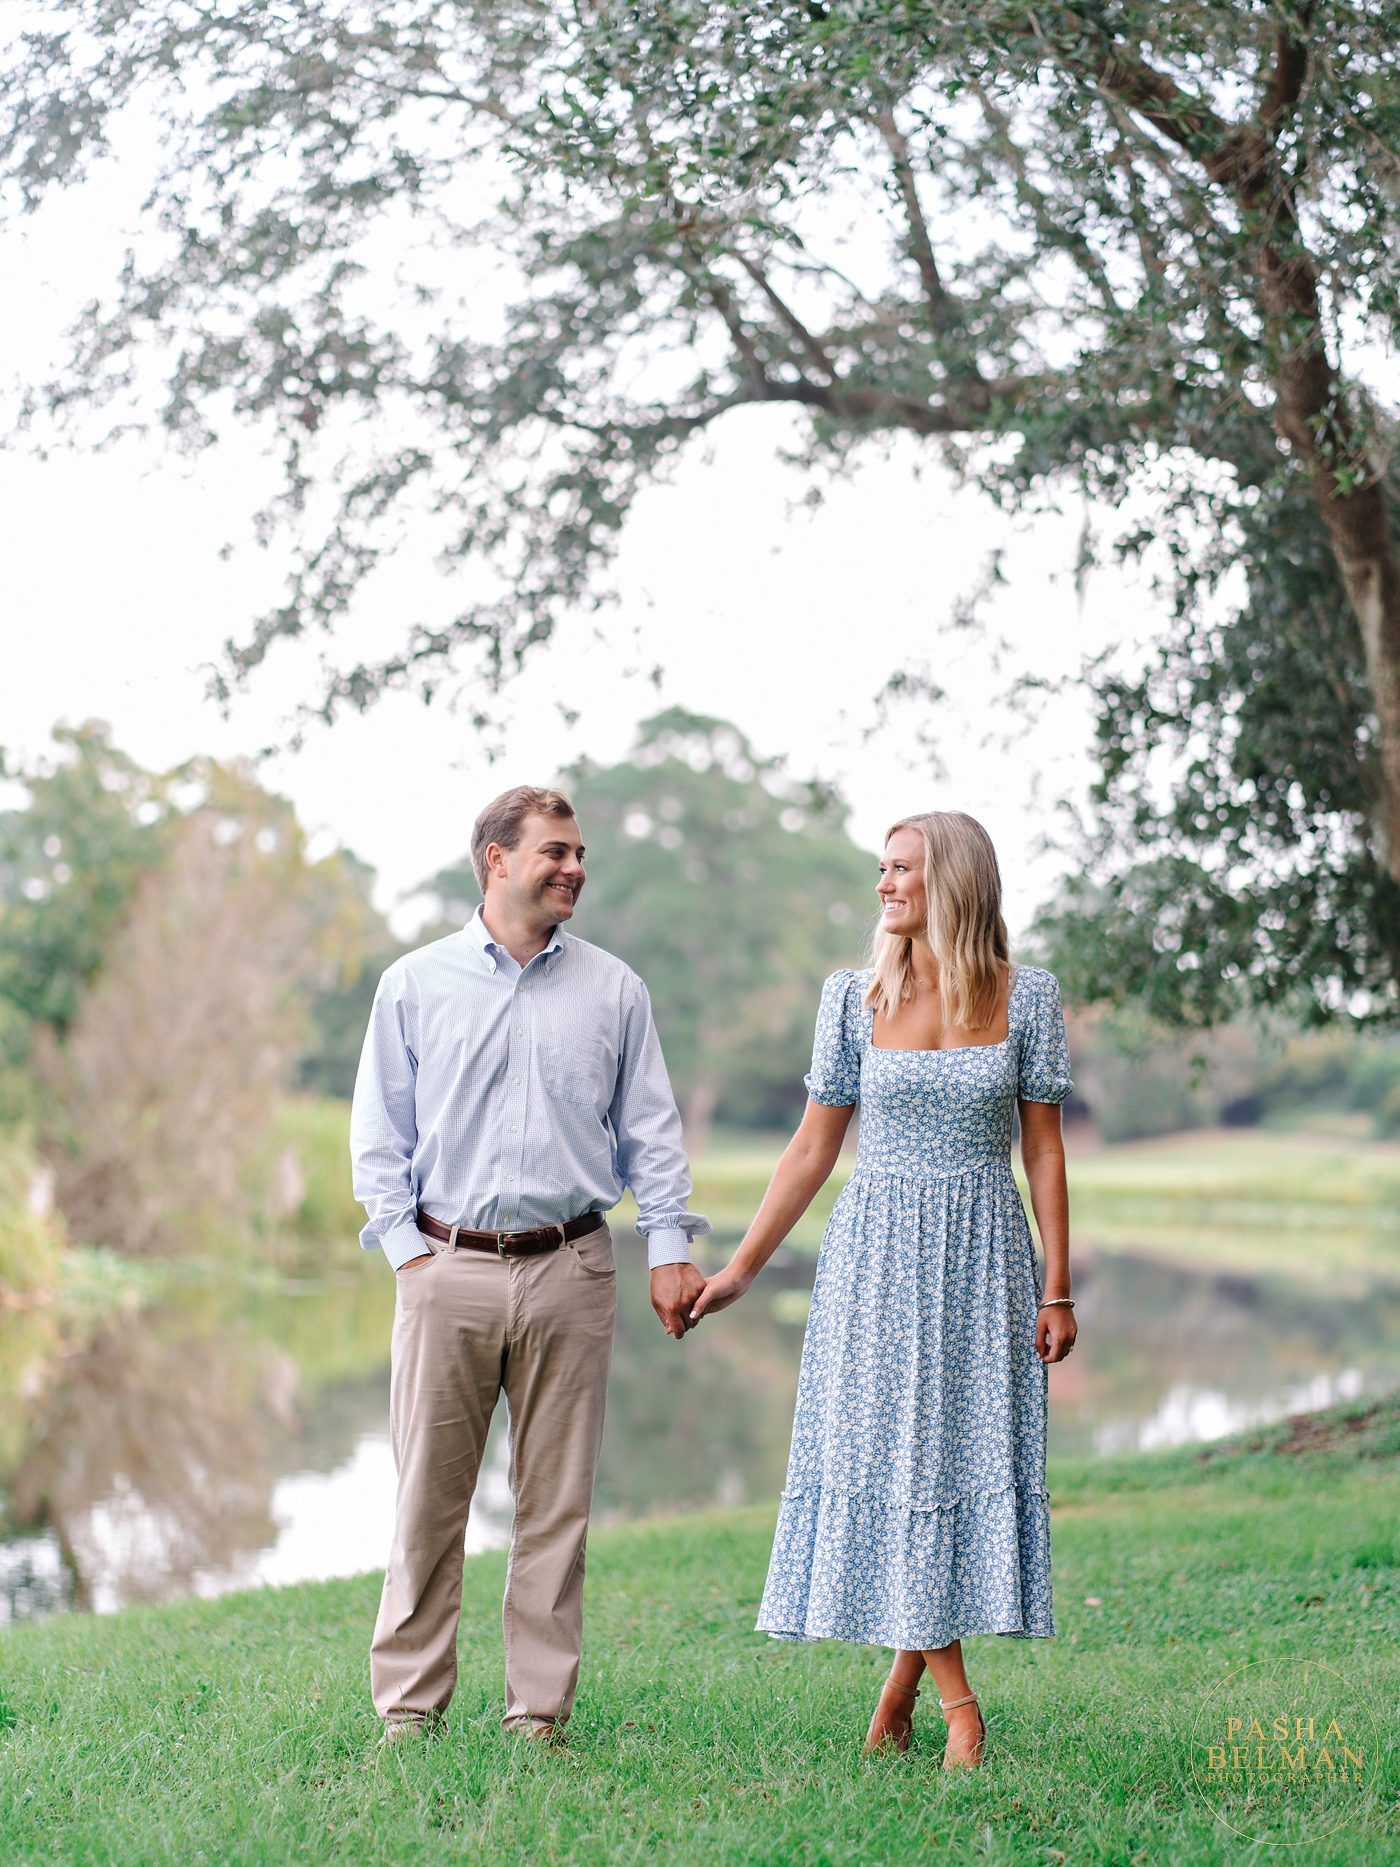 Fun Engagement Photography Session in Pawleys Island at Caledonia Golf and Fish Club